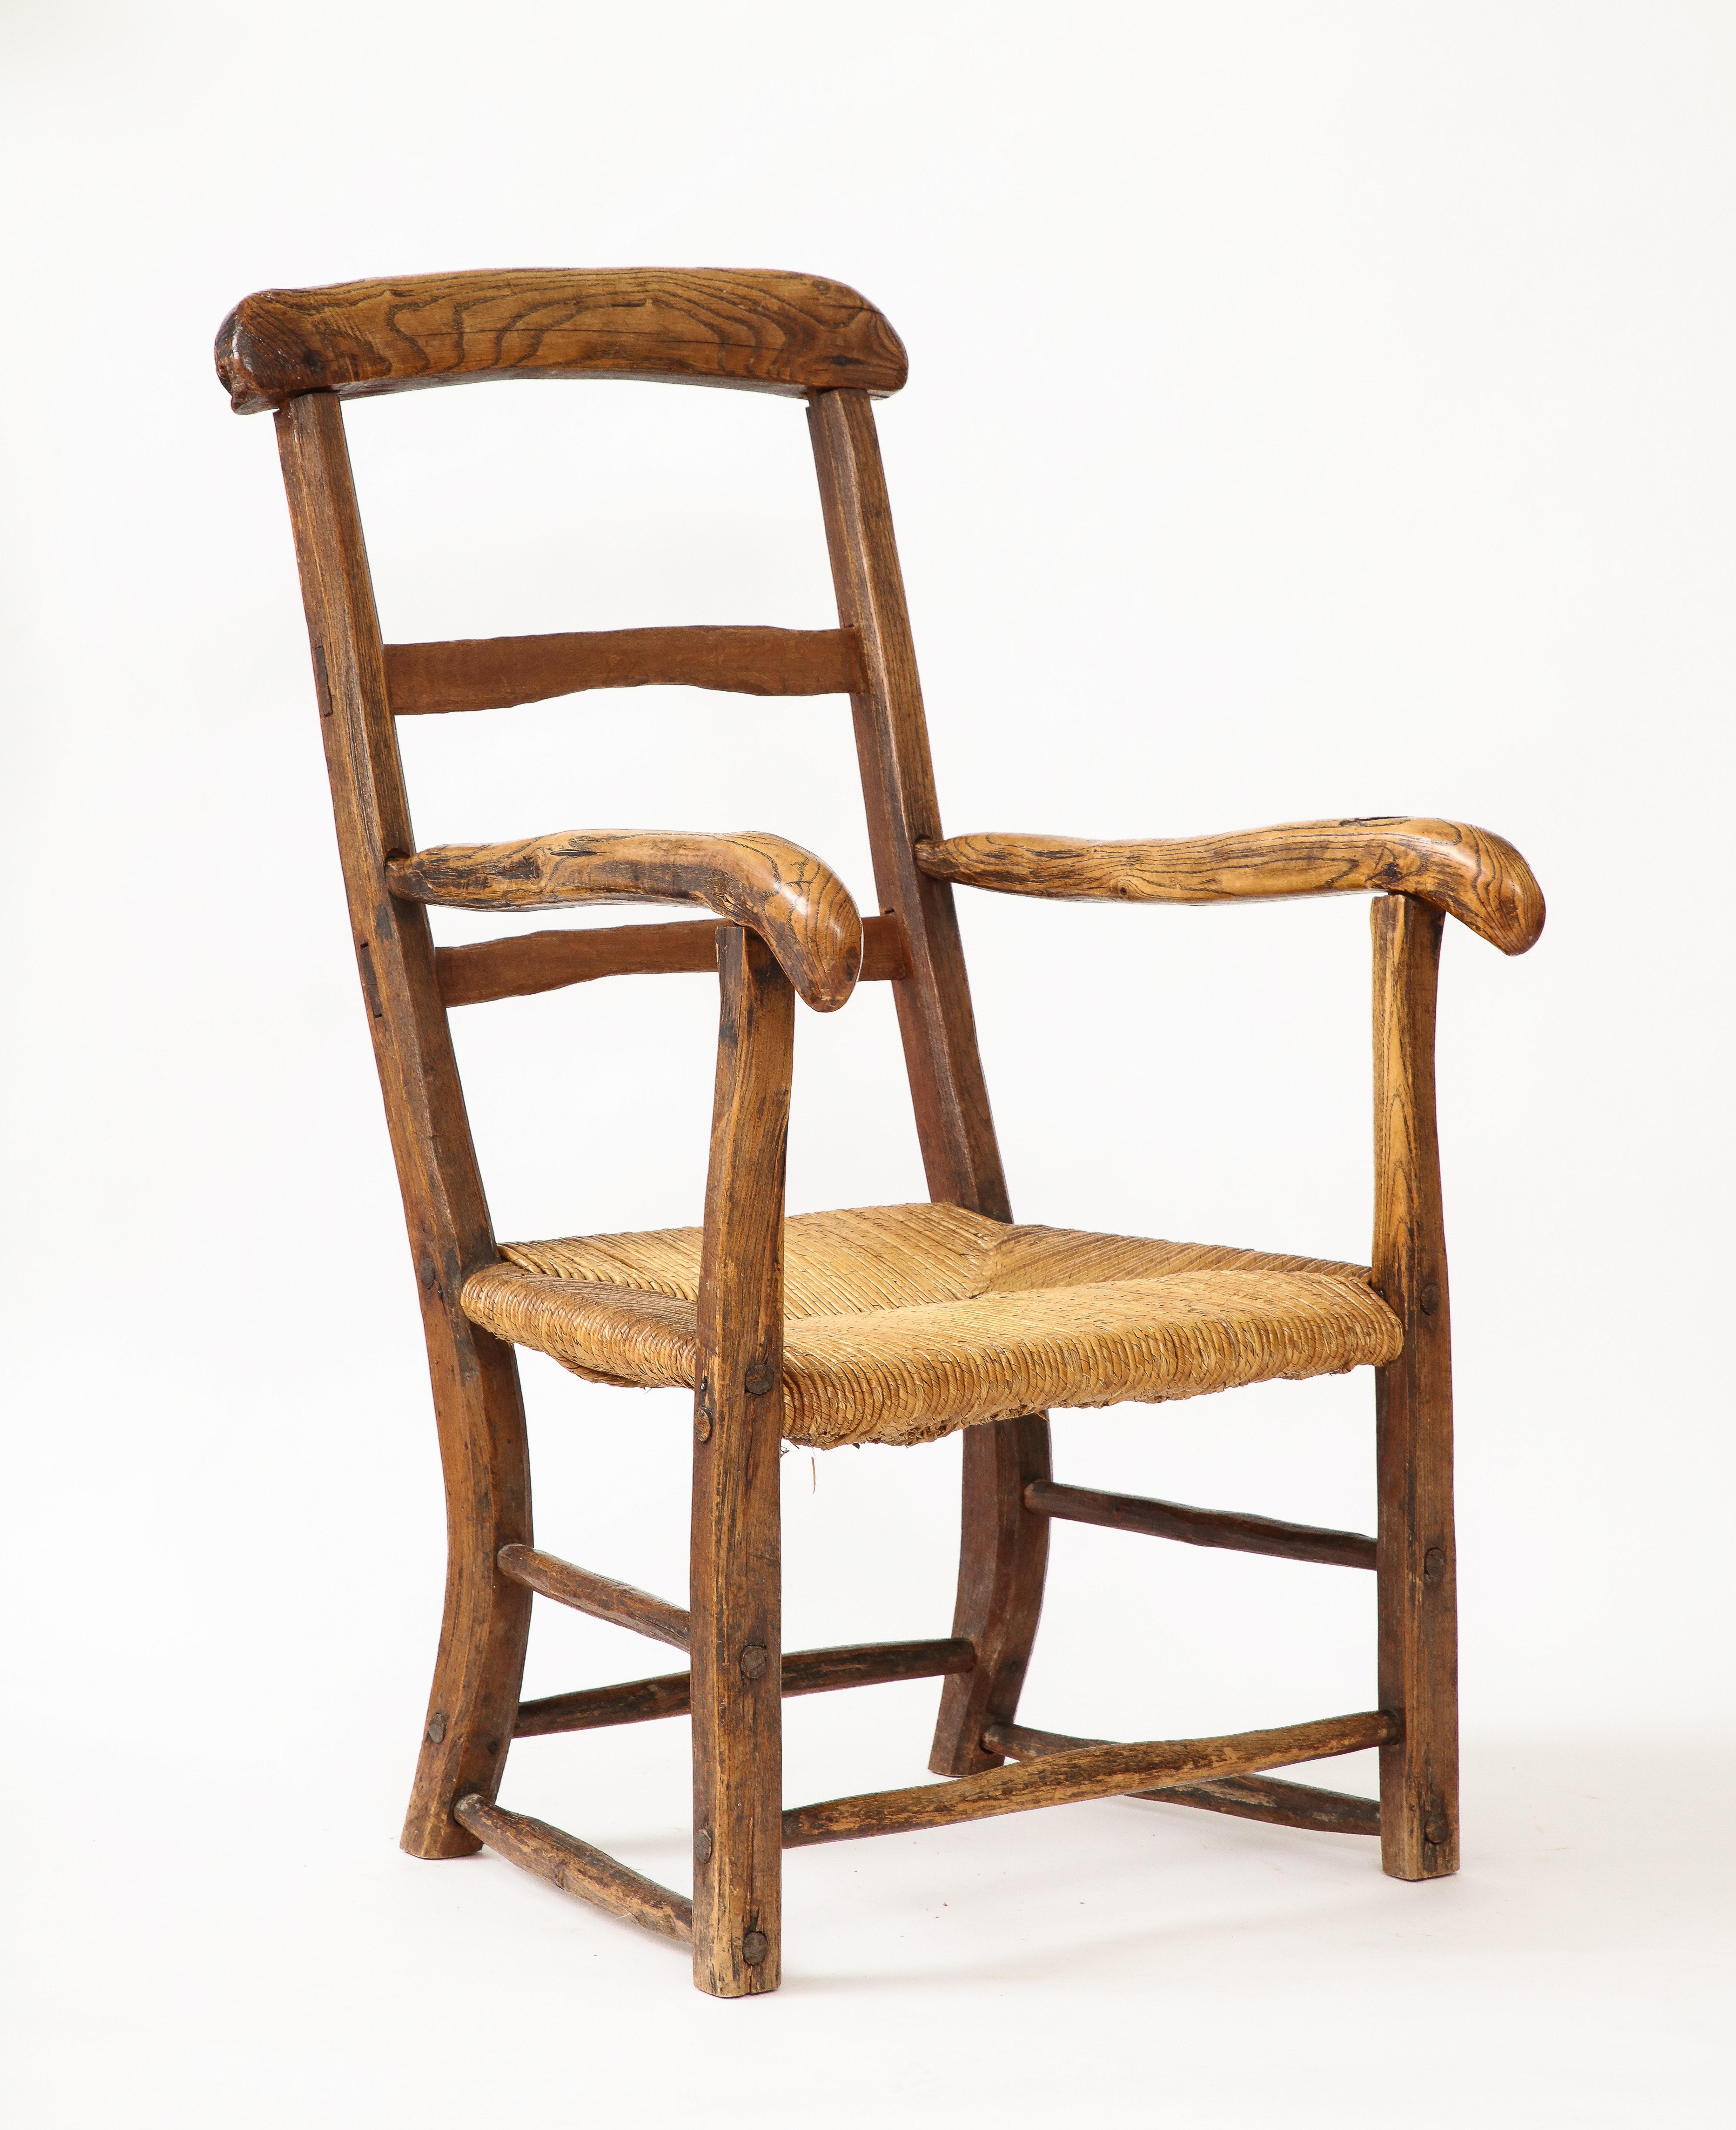 19th Century Rustic French Chair with Straw Seat For Sale 5